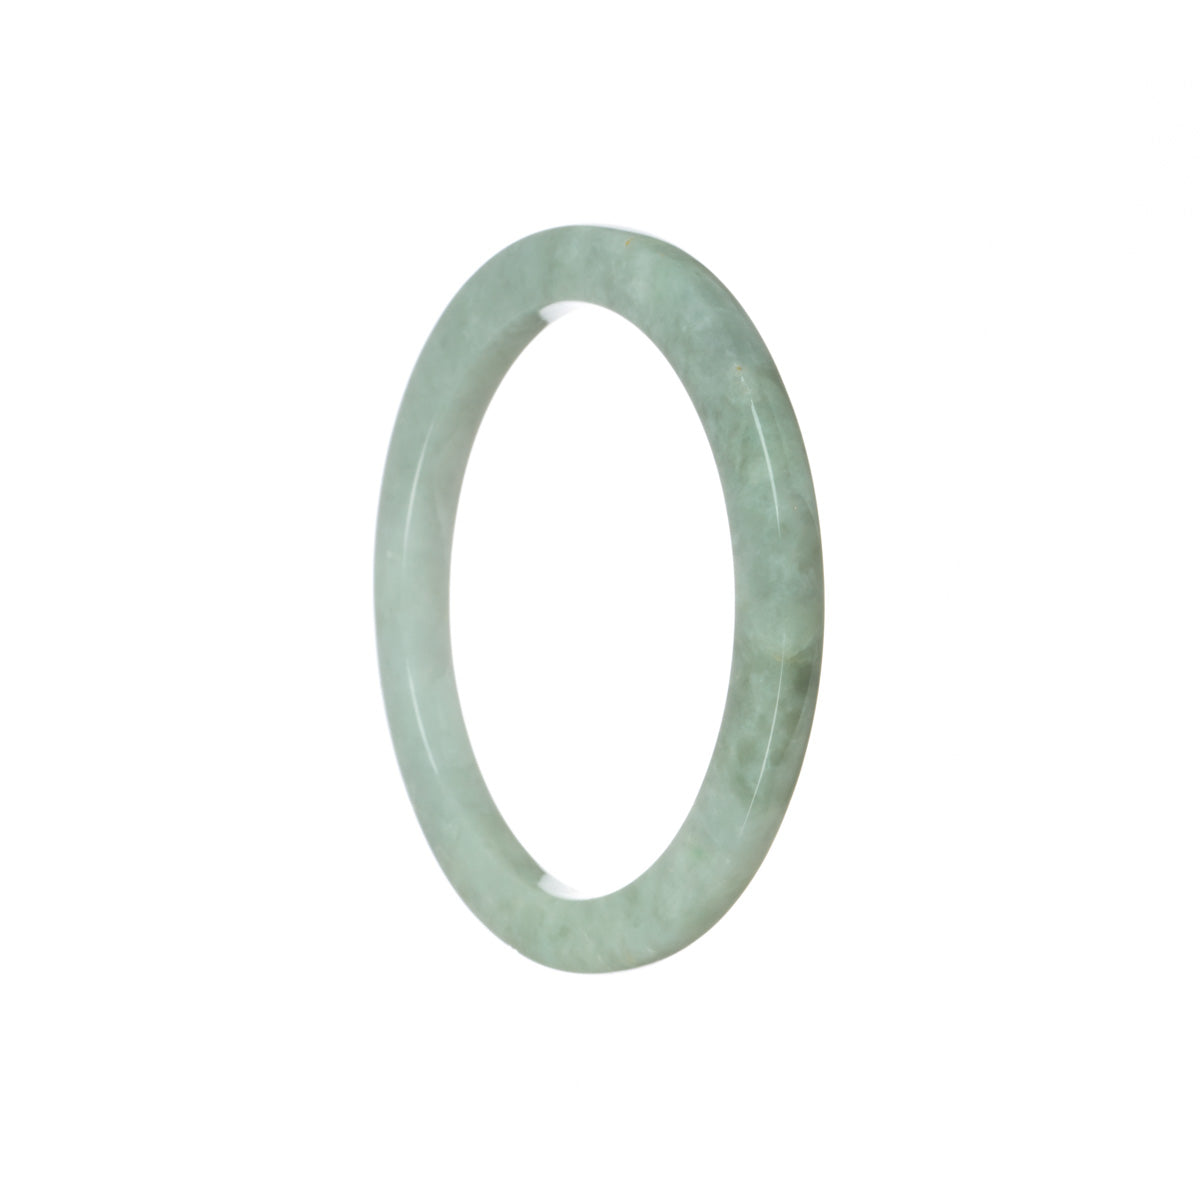 A stunning half moon-shaped bracelet made of genuine natural light grey Burmese Jade, measuring 56mm in size. Perfect for adding elegance and natural beauty to any outfit.